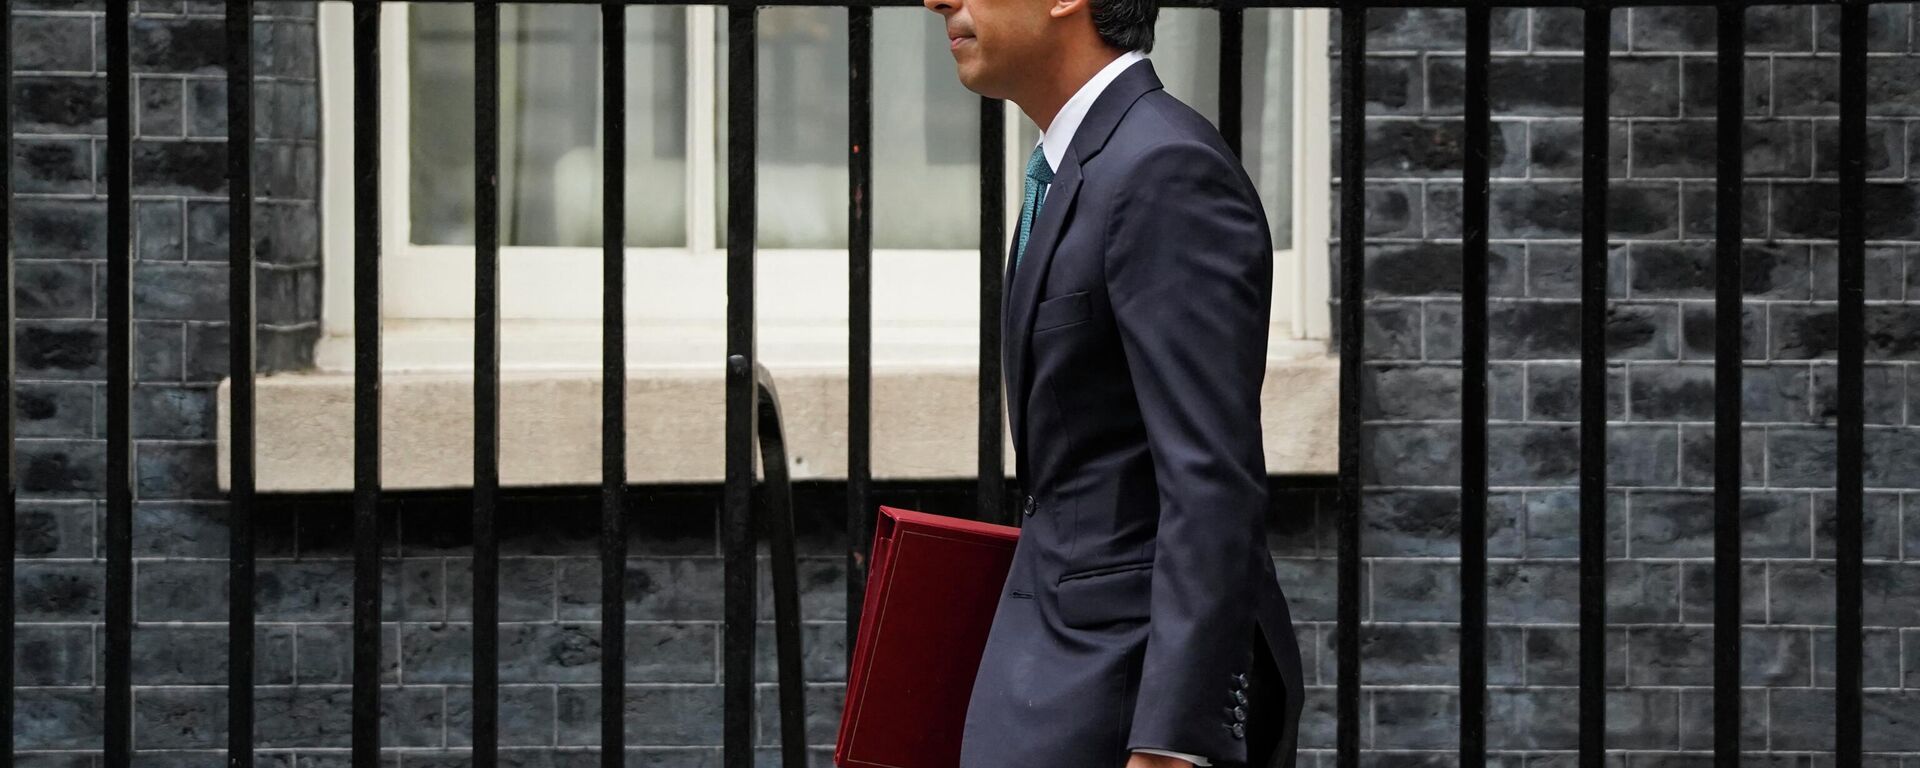 Britain's Prime Minister Rishi Sunak leaves 10 Downing Street in central London on October 26, 2022, for the House of Commons to take part in his first Prime Minister's Questions (PMQs) - Sputnik International, 1920, 28.10.2022